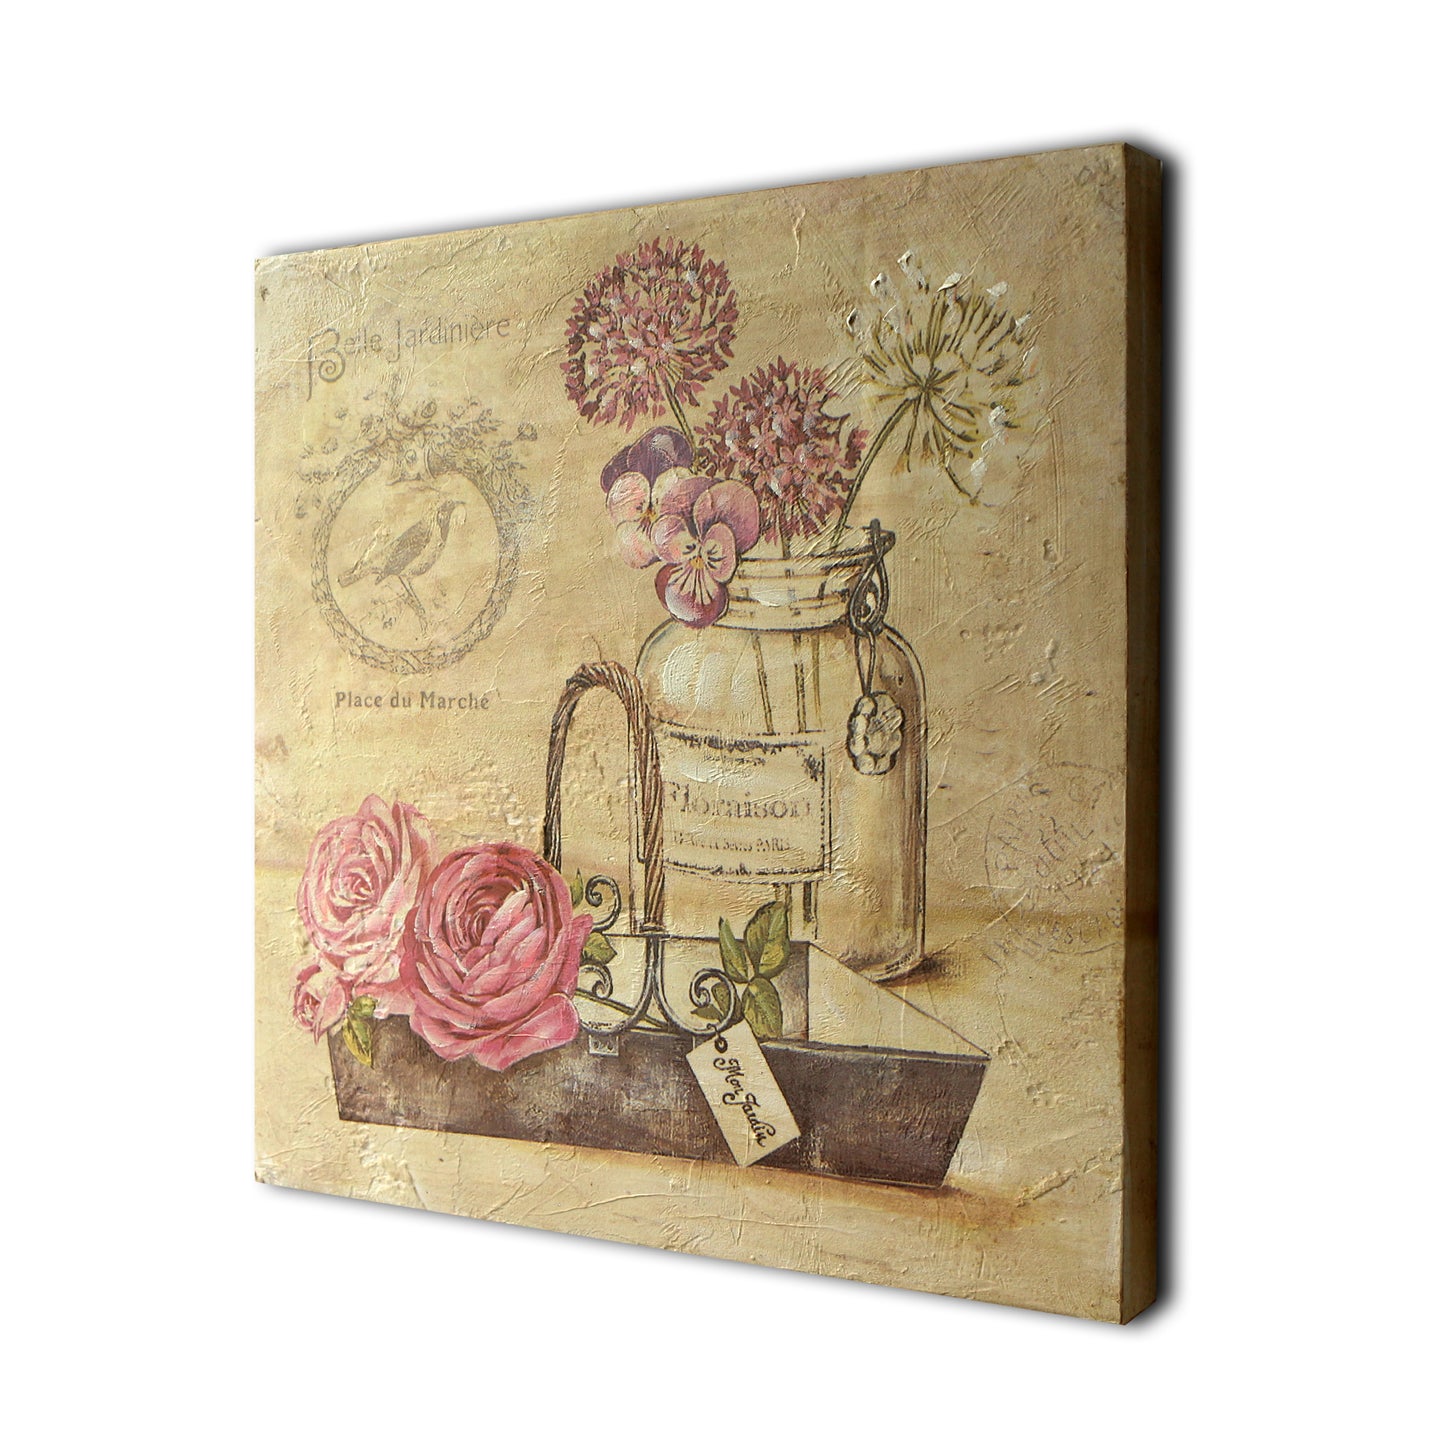 CVHOMEDECO. Rustic Vintage Hand Painted Wooden Frame Wall Hanging 3D Painting Decoration Art, Flower with Basket Design, 15 x 15 Inch